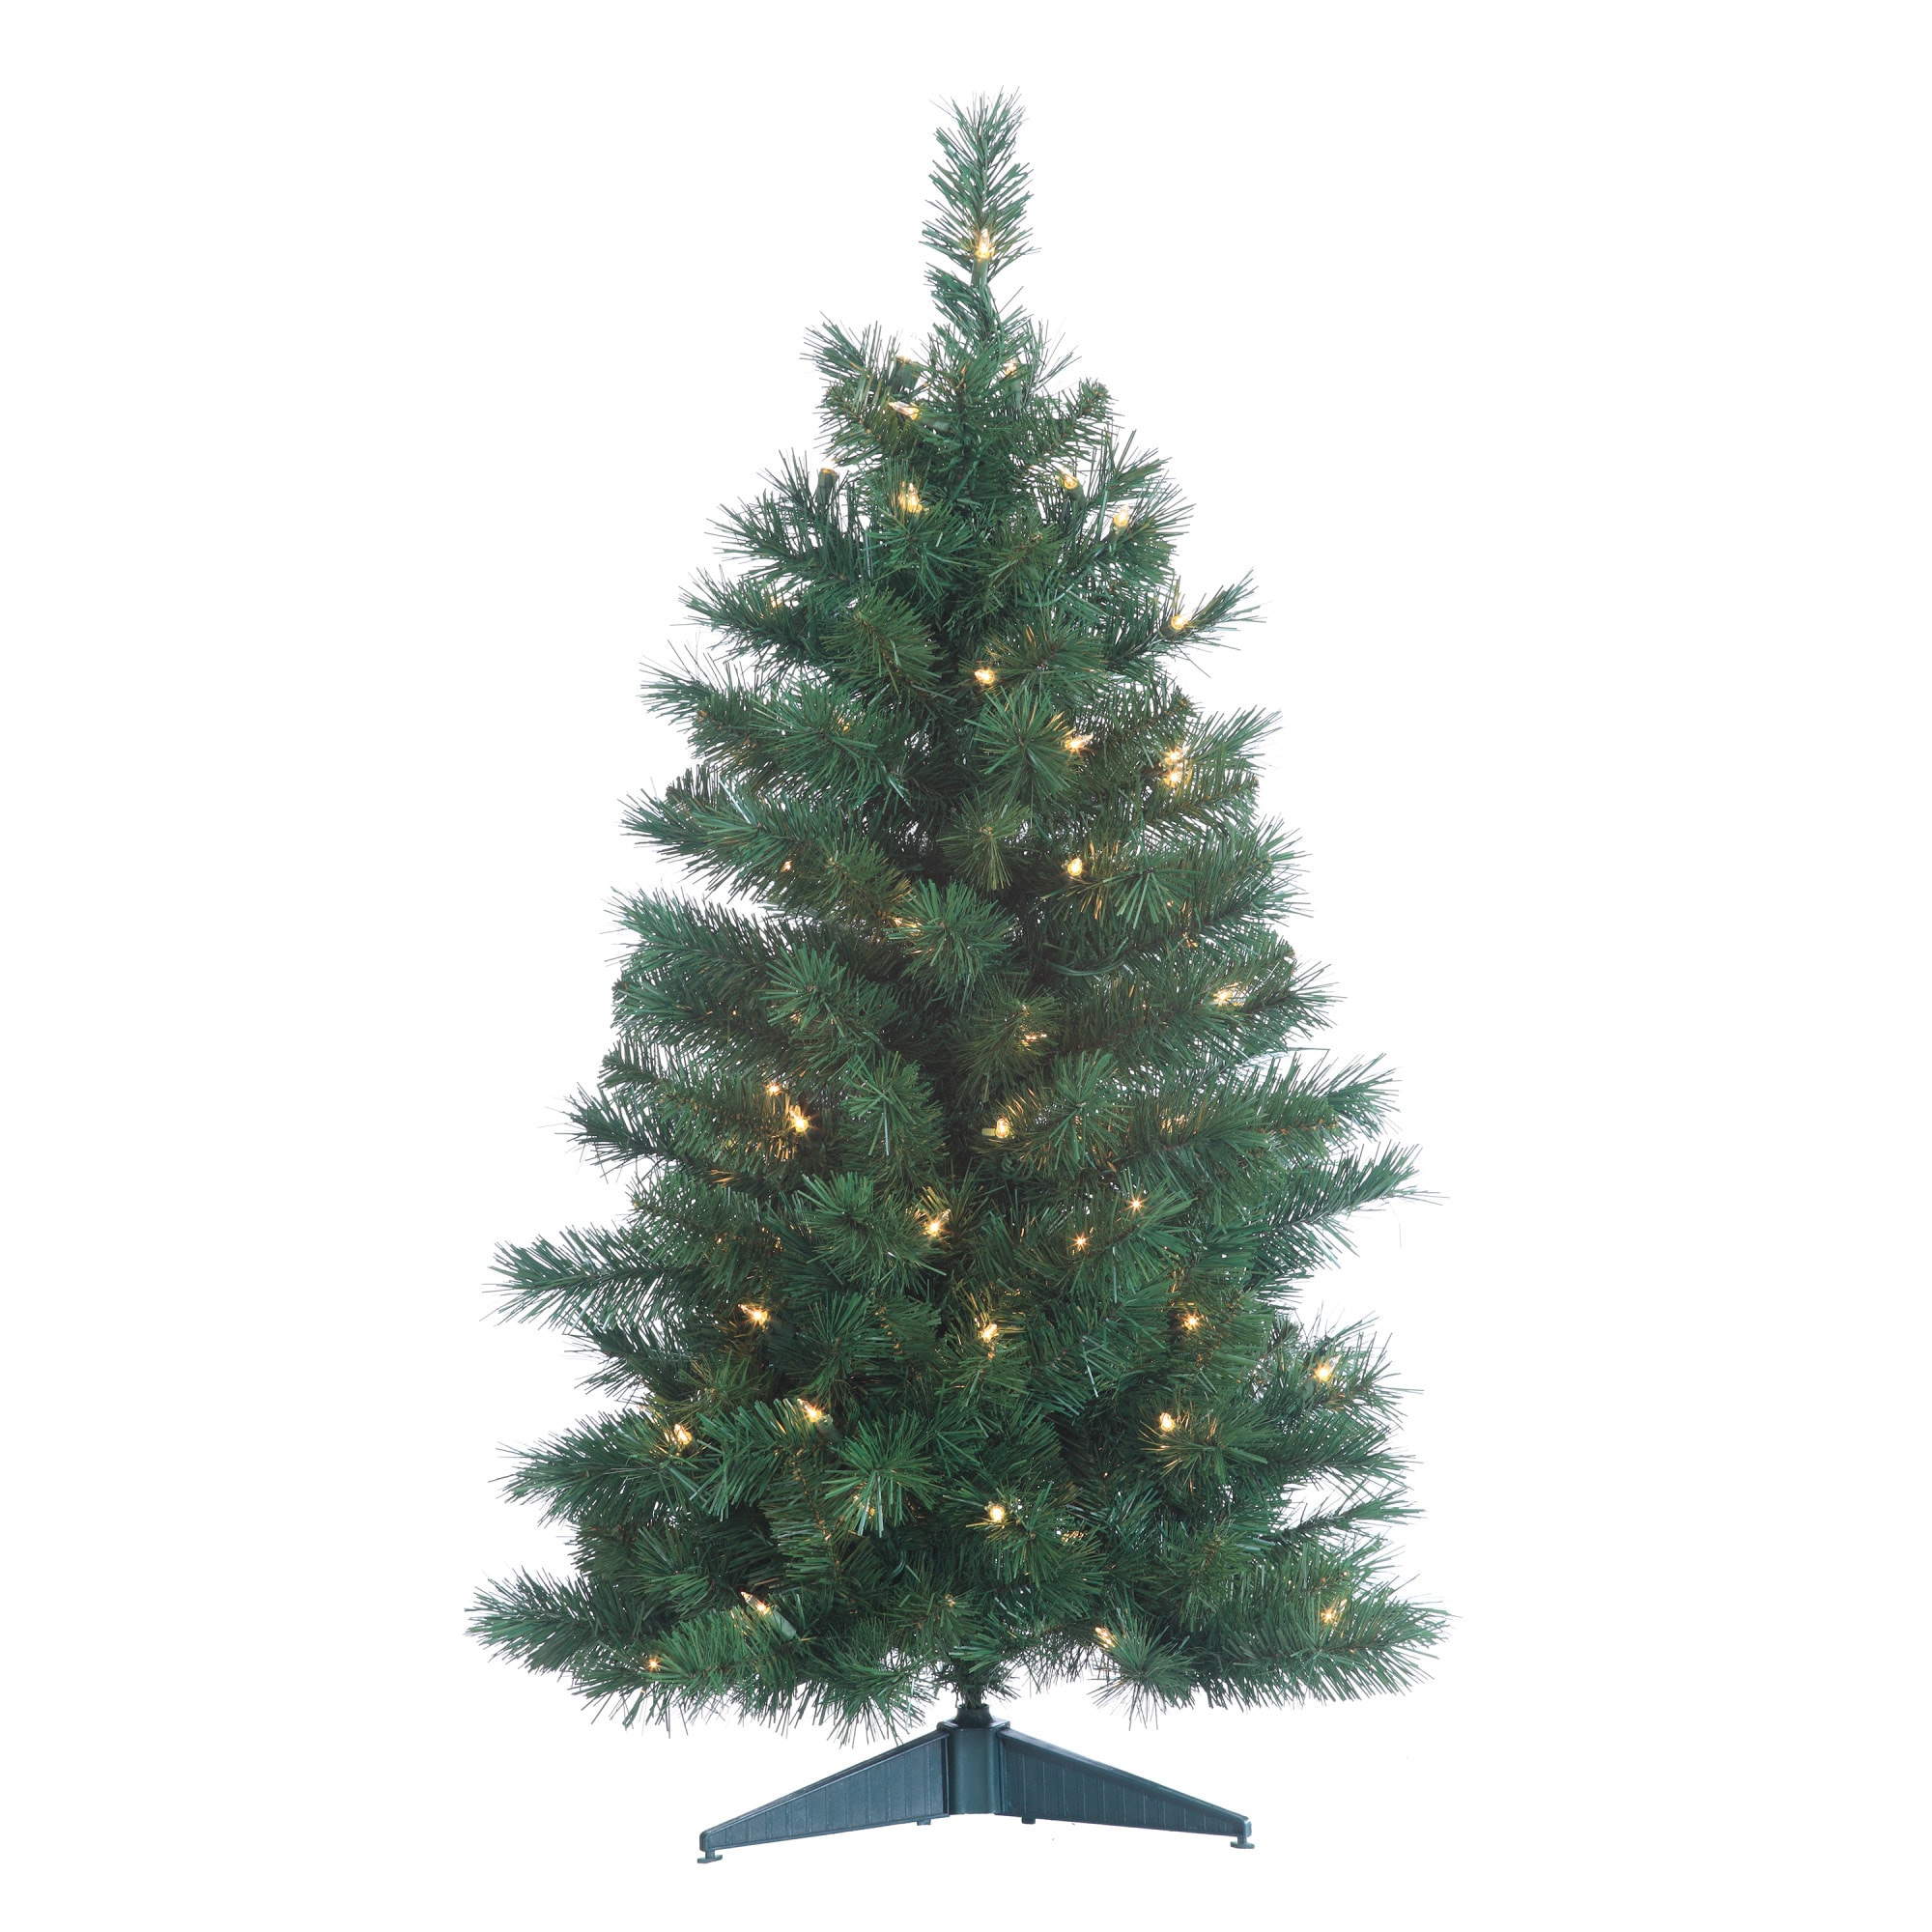 36"/3FT Holiday Decor Pine Green Artificial Christmas Tree Office School W/Stand 